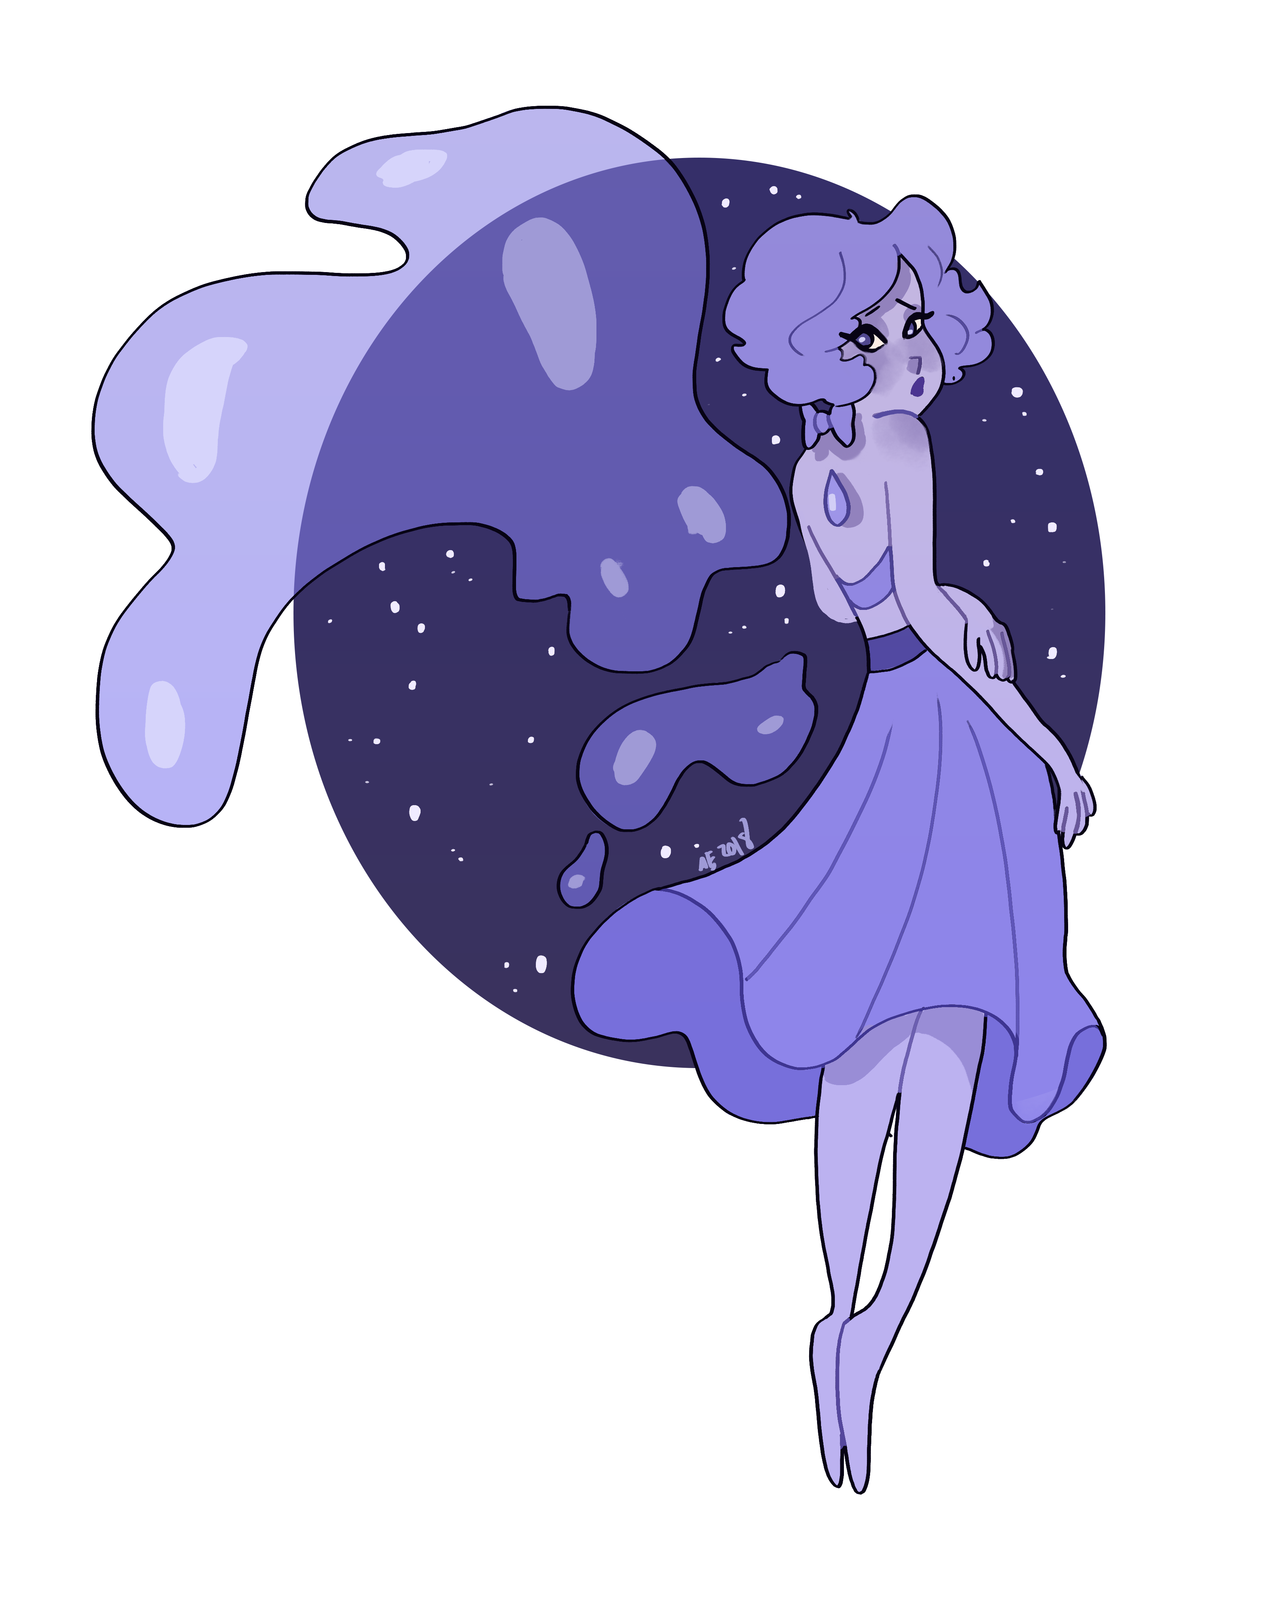 space girl, with eyes made of stars